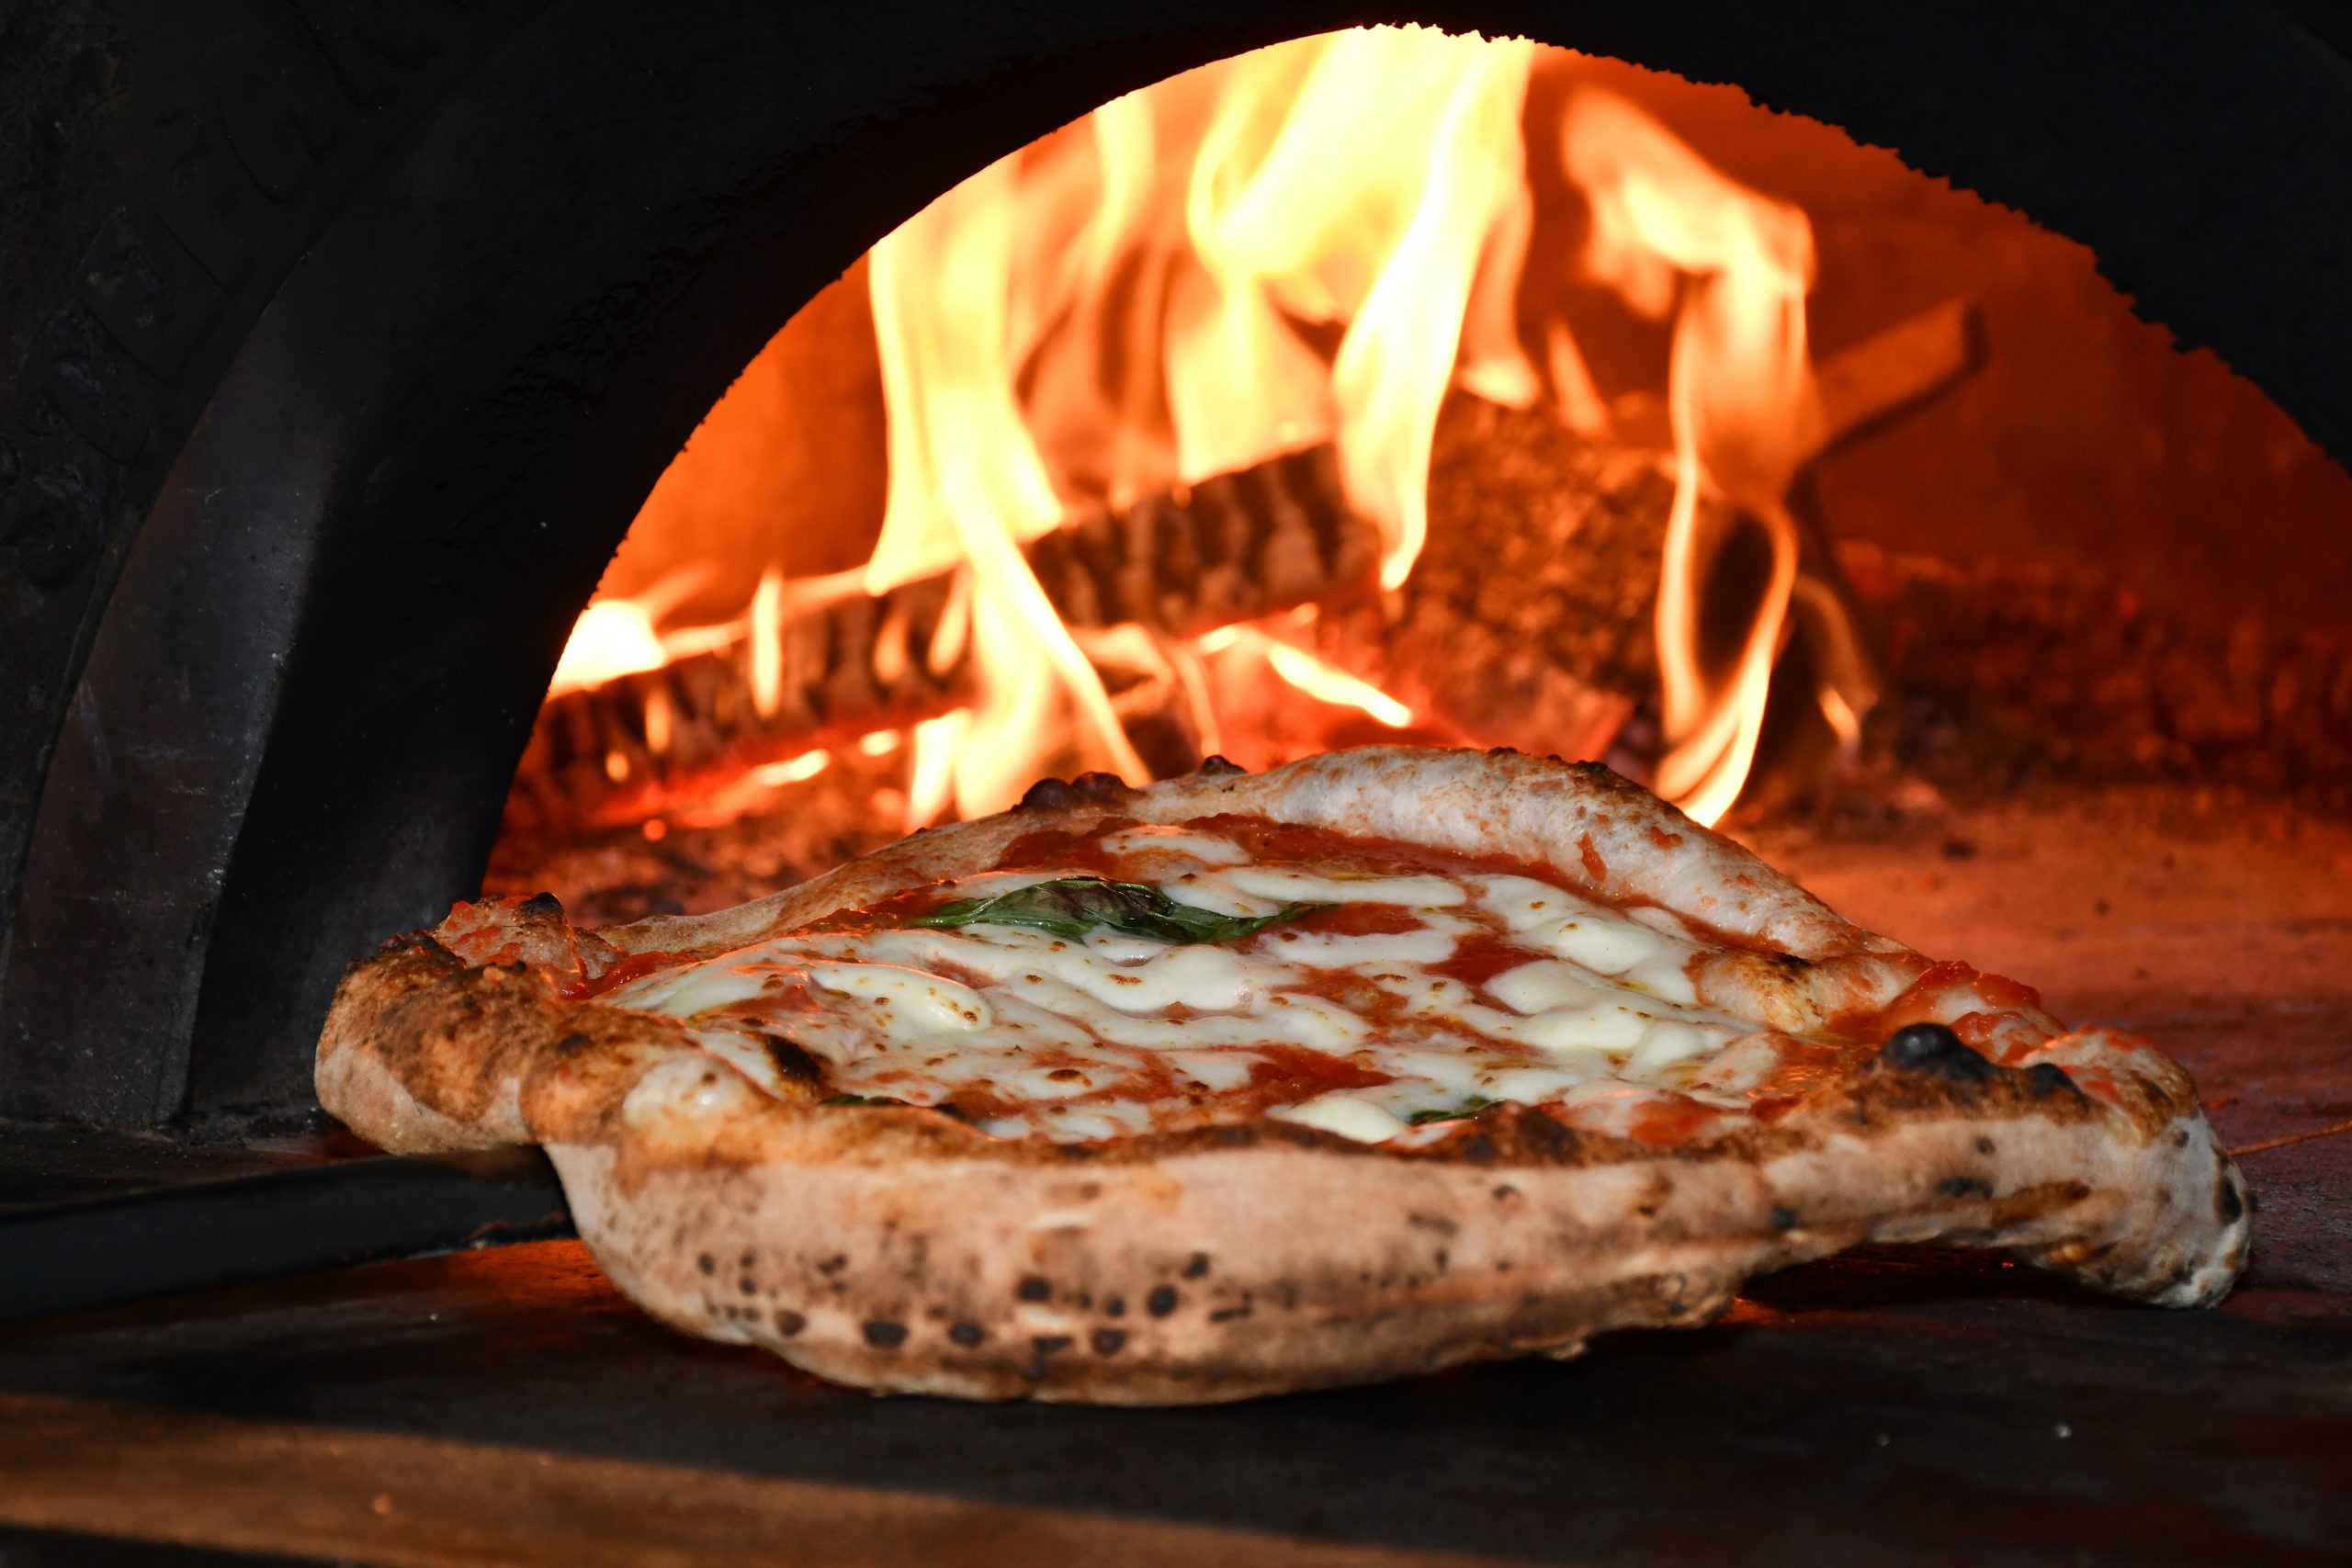 A pizza being taken out of a wood-fired oven.